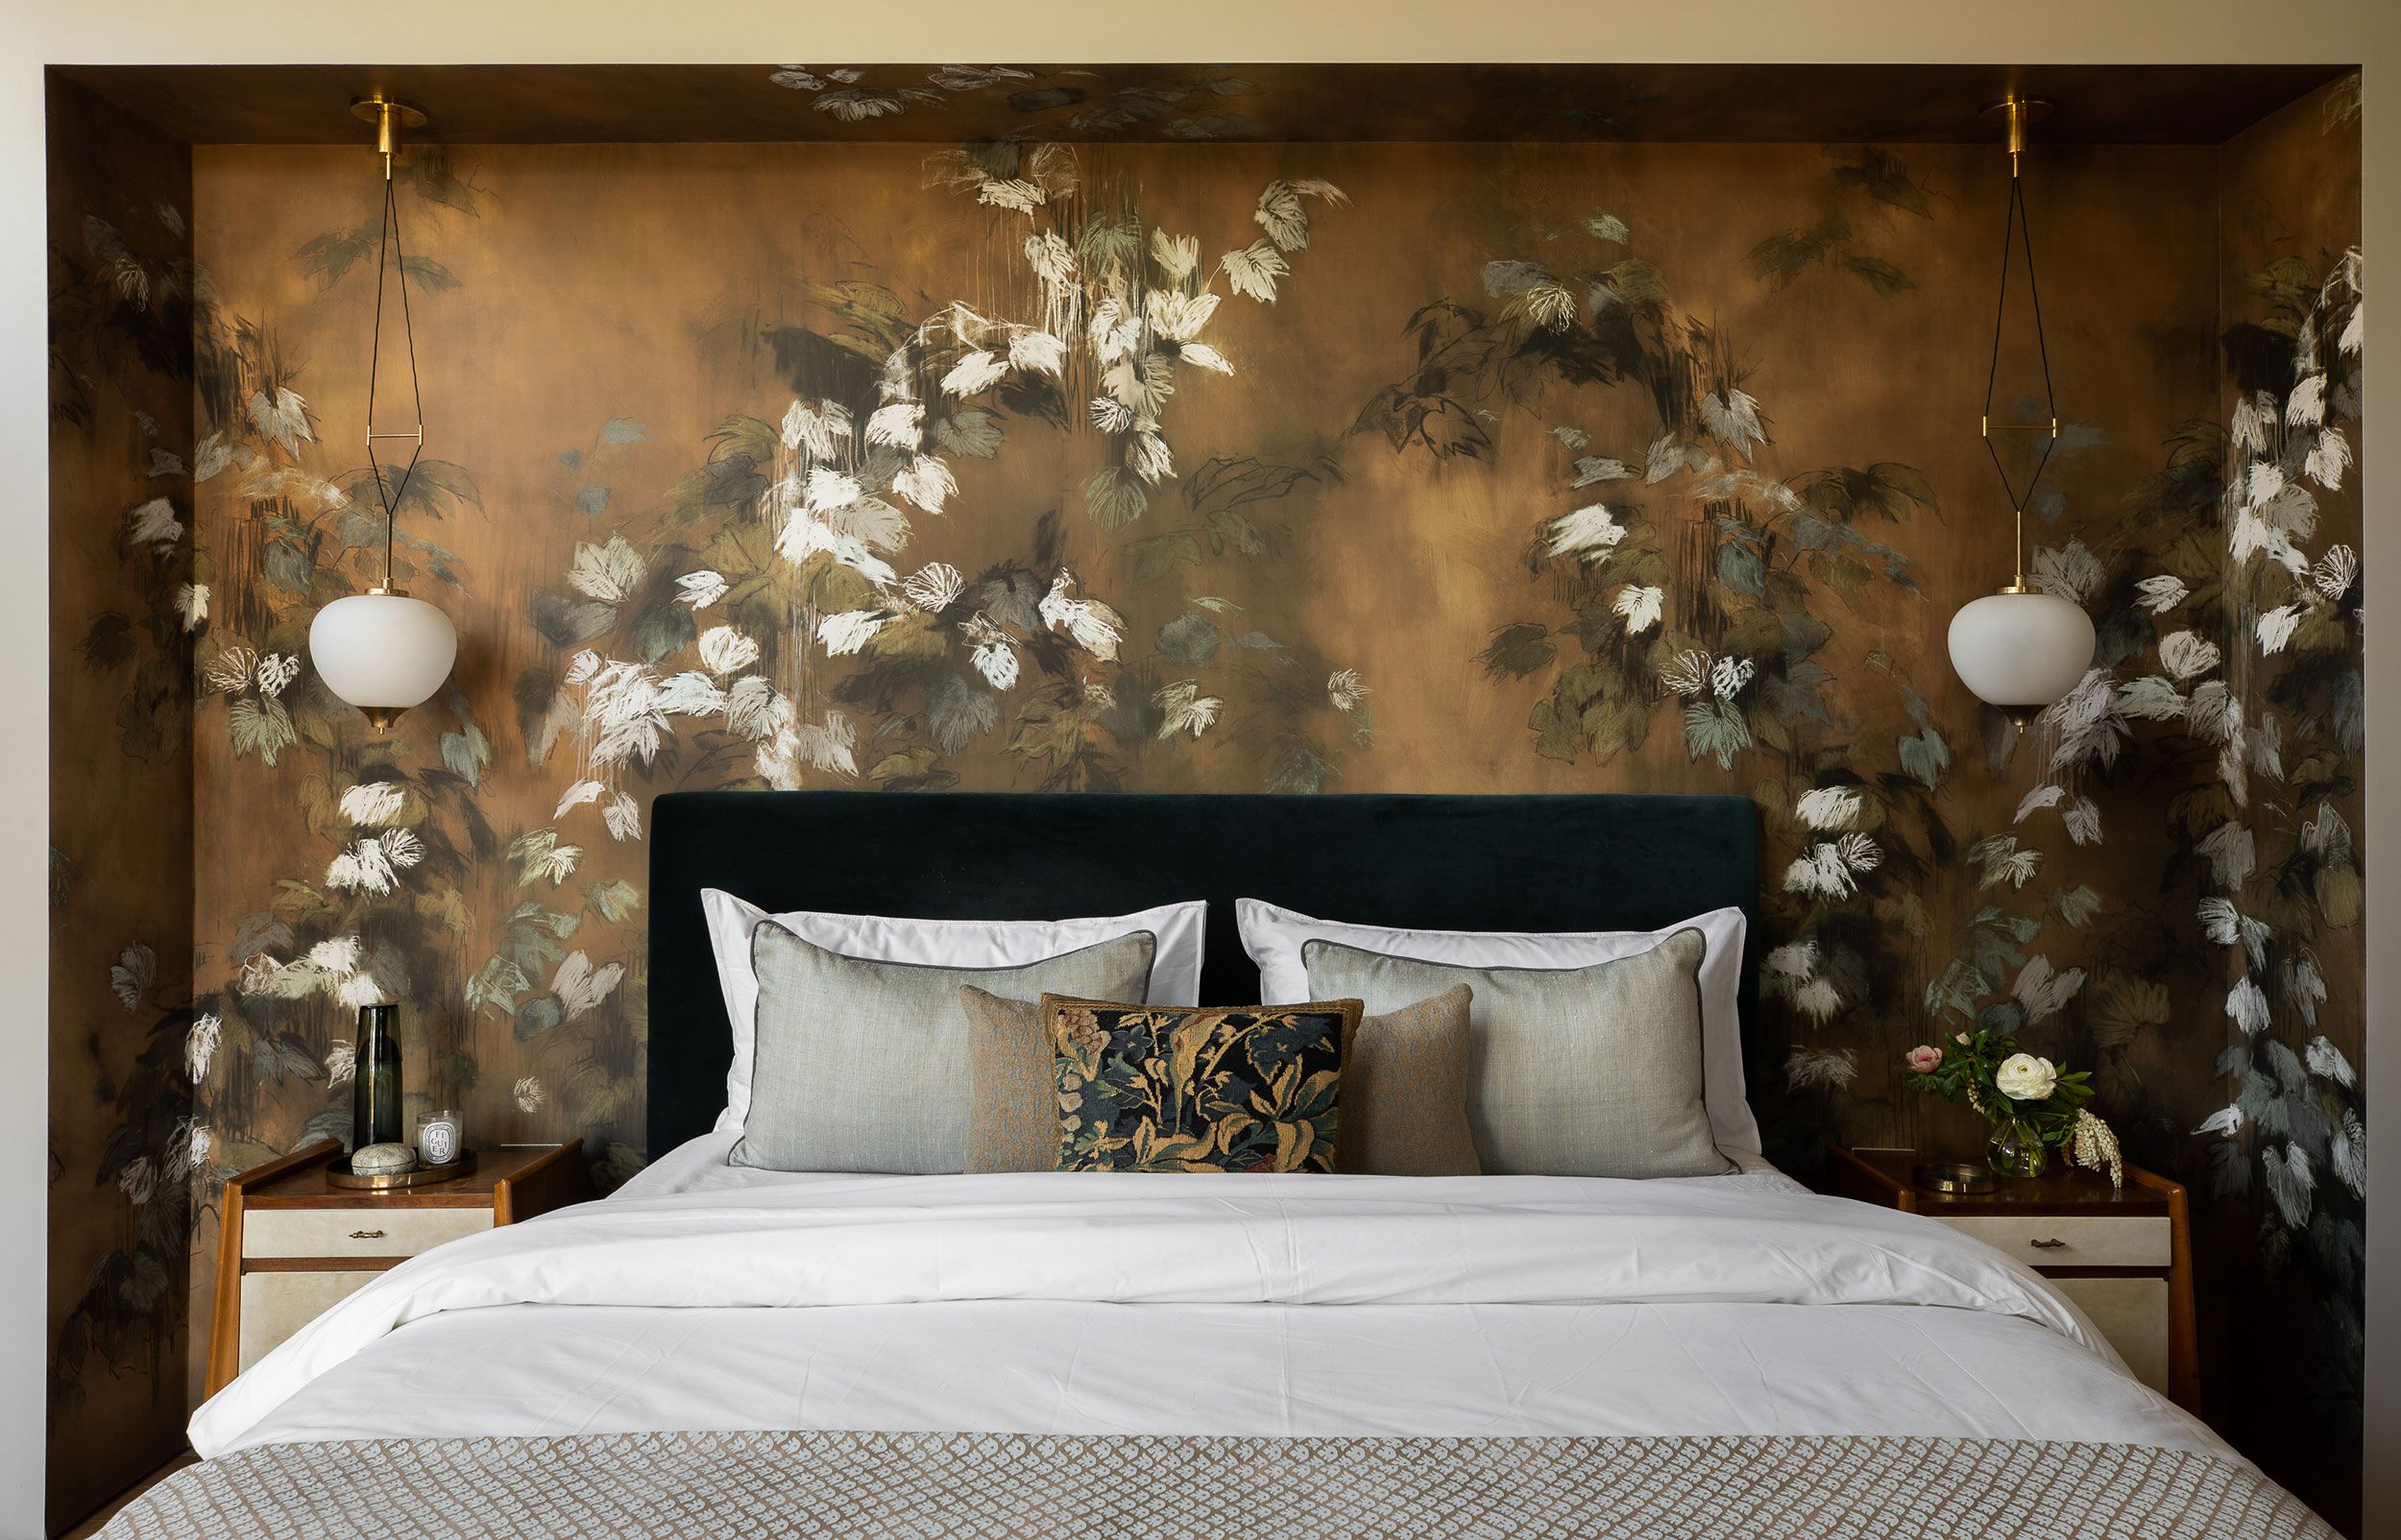 Wallpaper Designs For Bedroom That You Cant Resist  Myindianthings